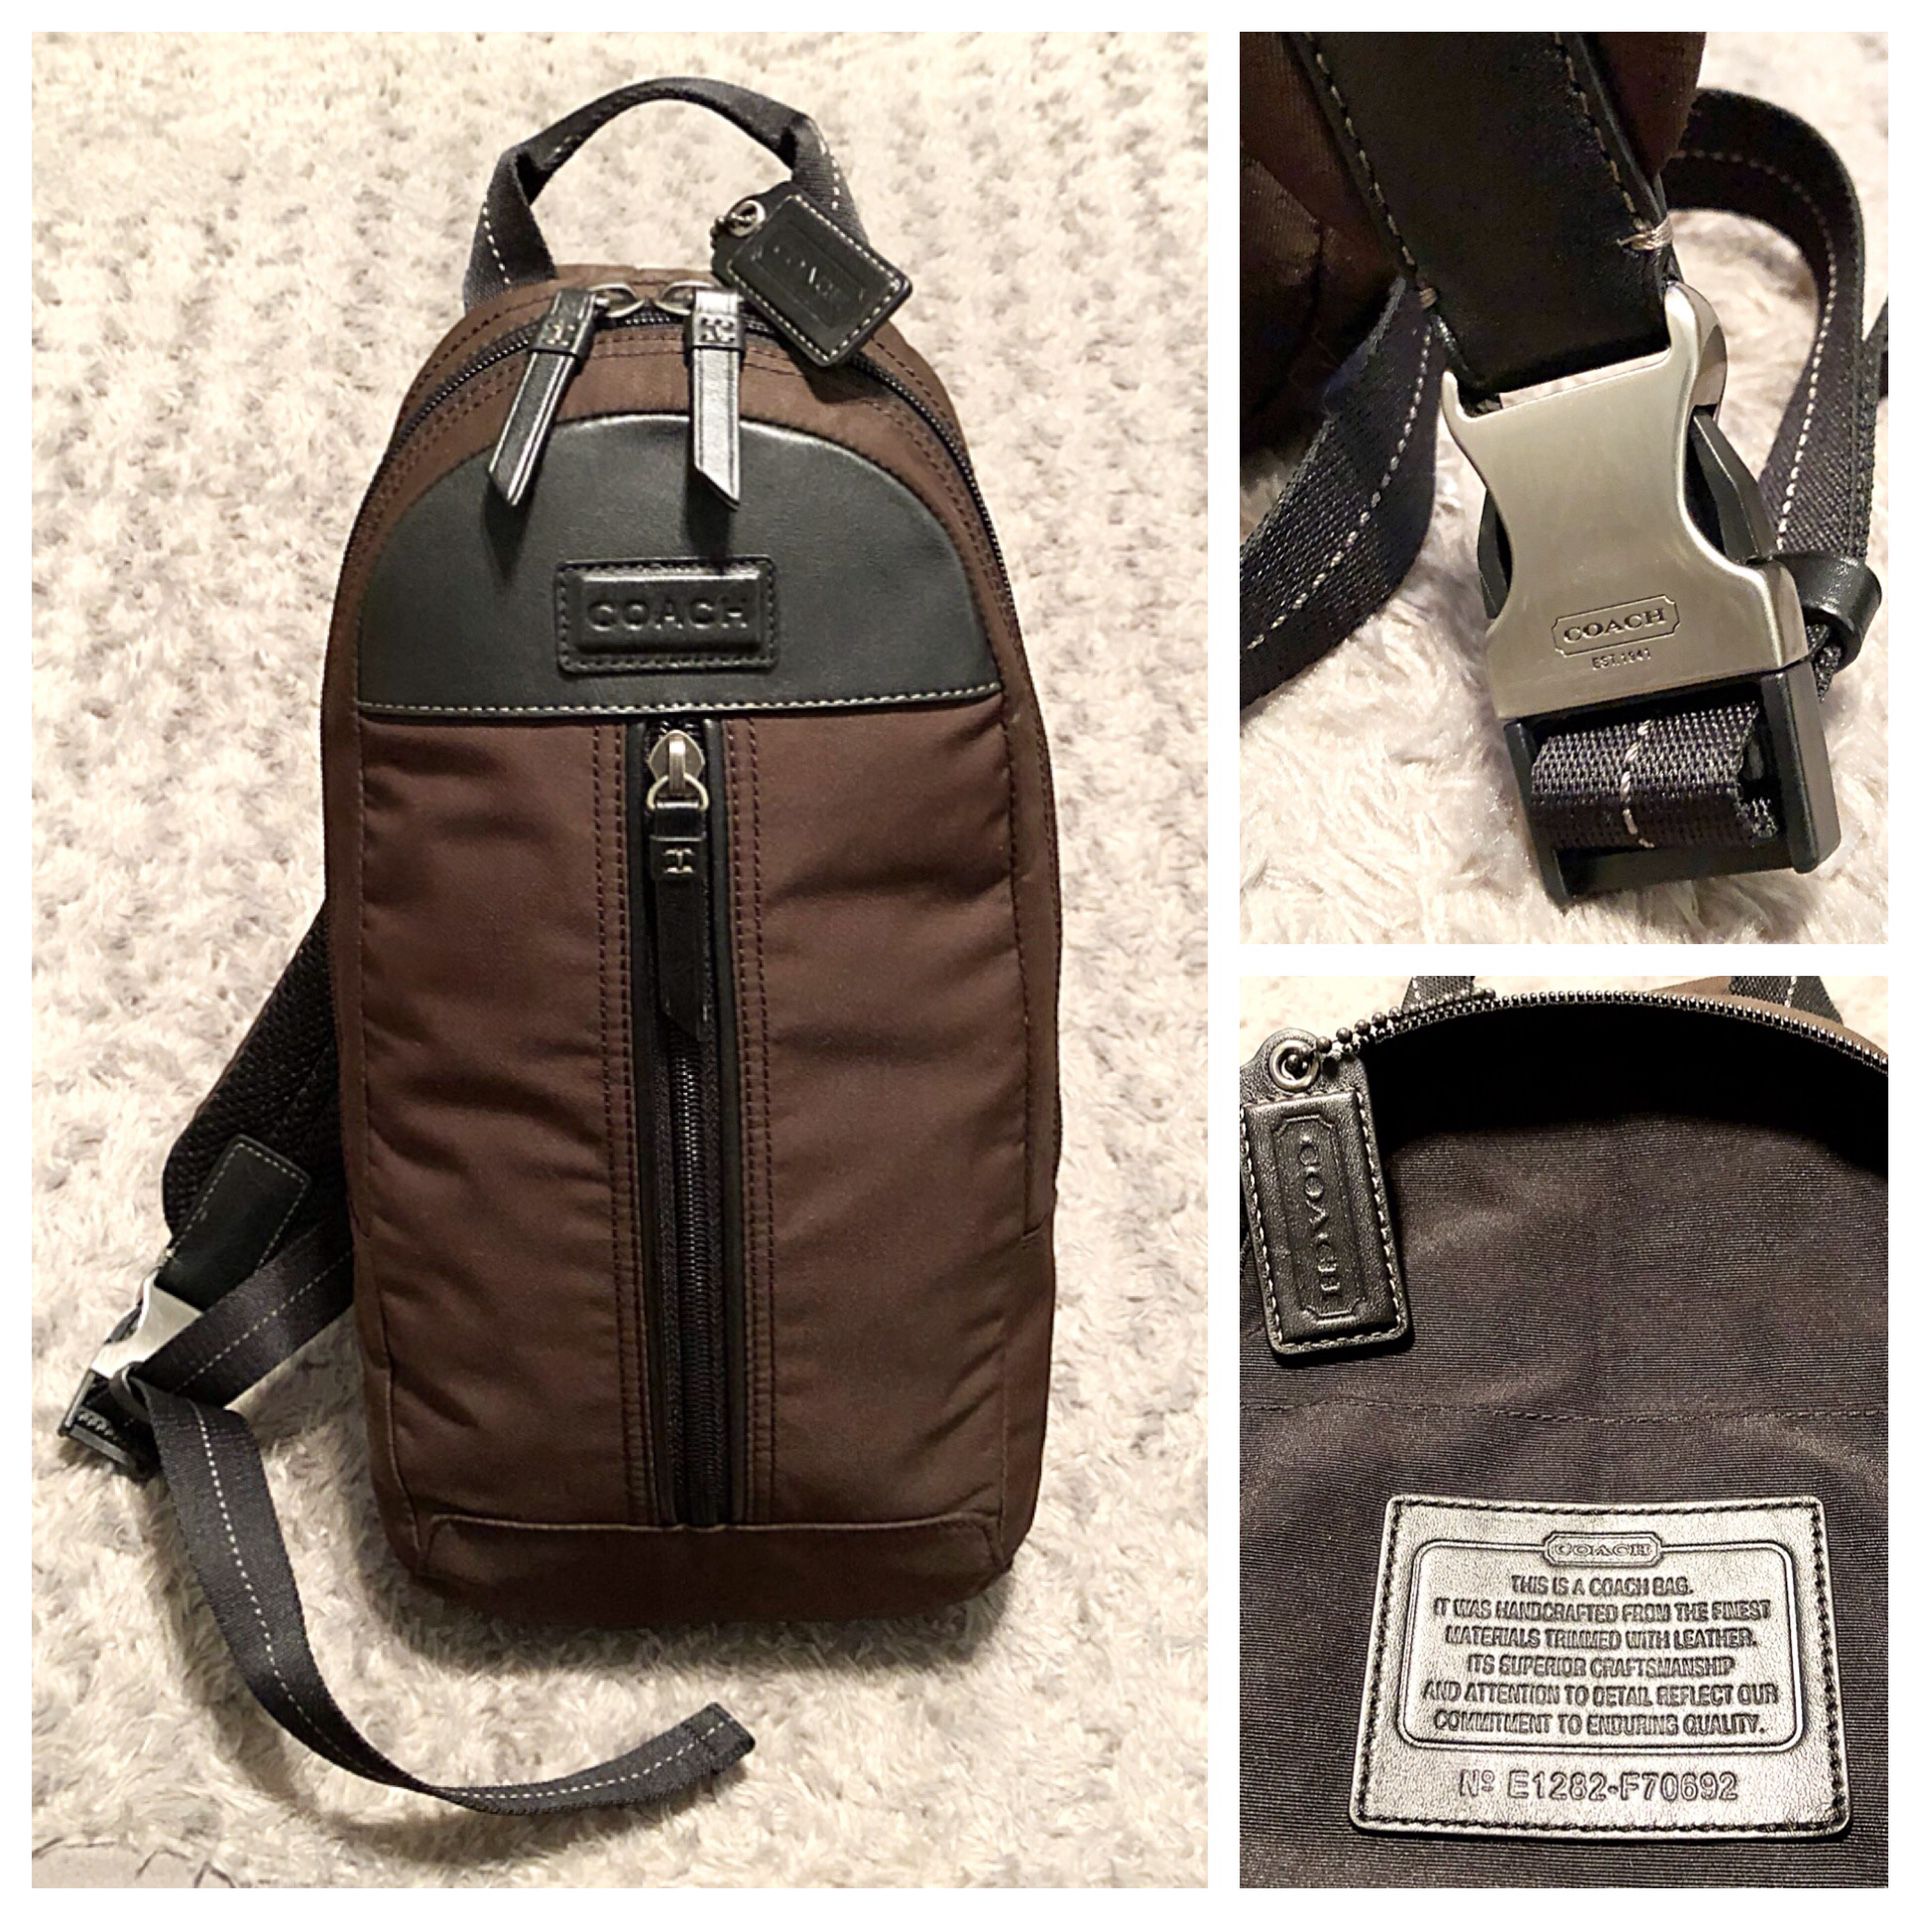 Men’s Coach crossbody paid $225 Like new! Varick nylon sling bag Style #F70692 COLOR Black and army green Pristine condition, inside and out. Nylon w